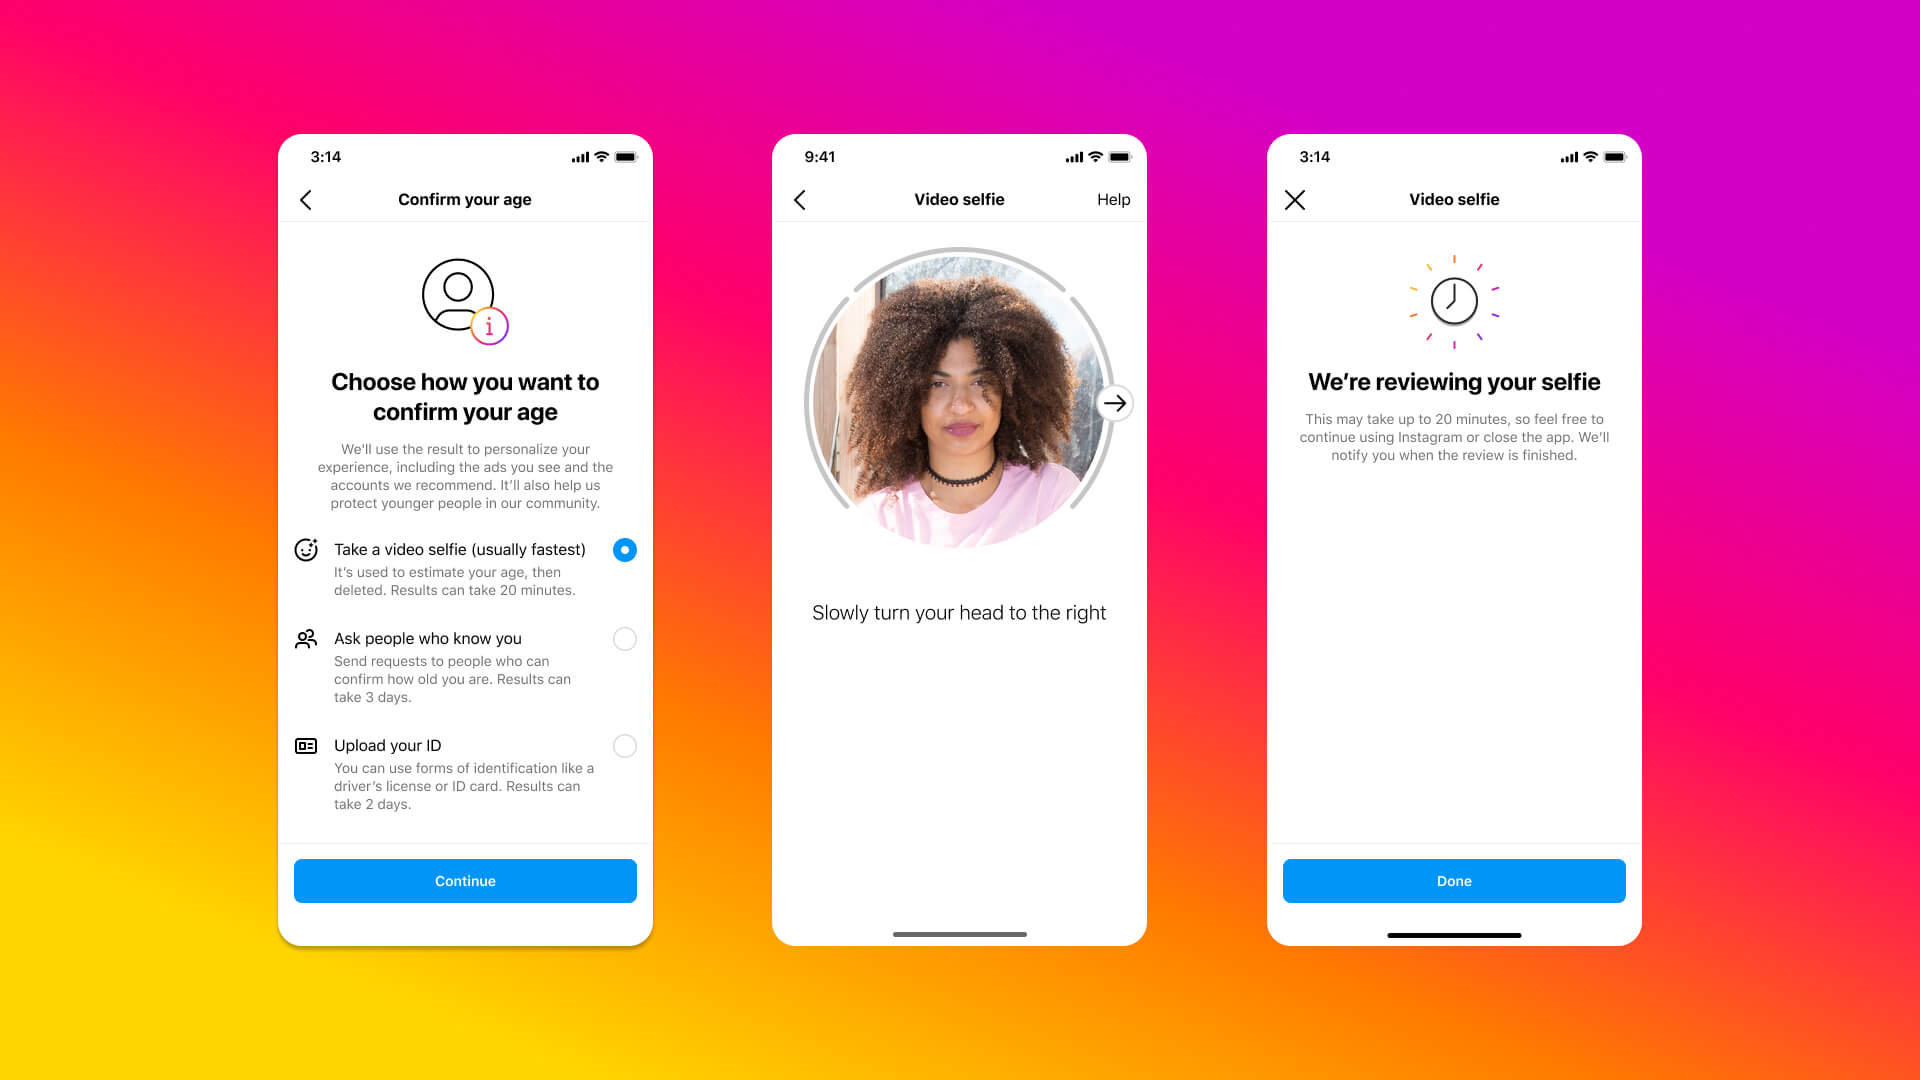 Instagram tests new age verification tools for 18 and over accounts, including video selfies - TechCrunch (Picture 2)